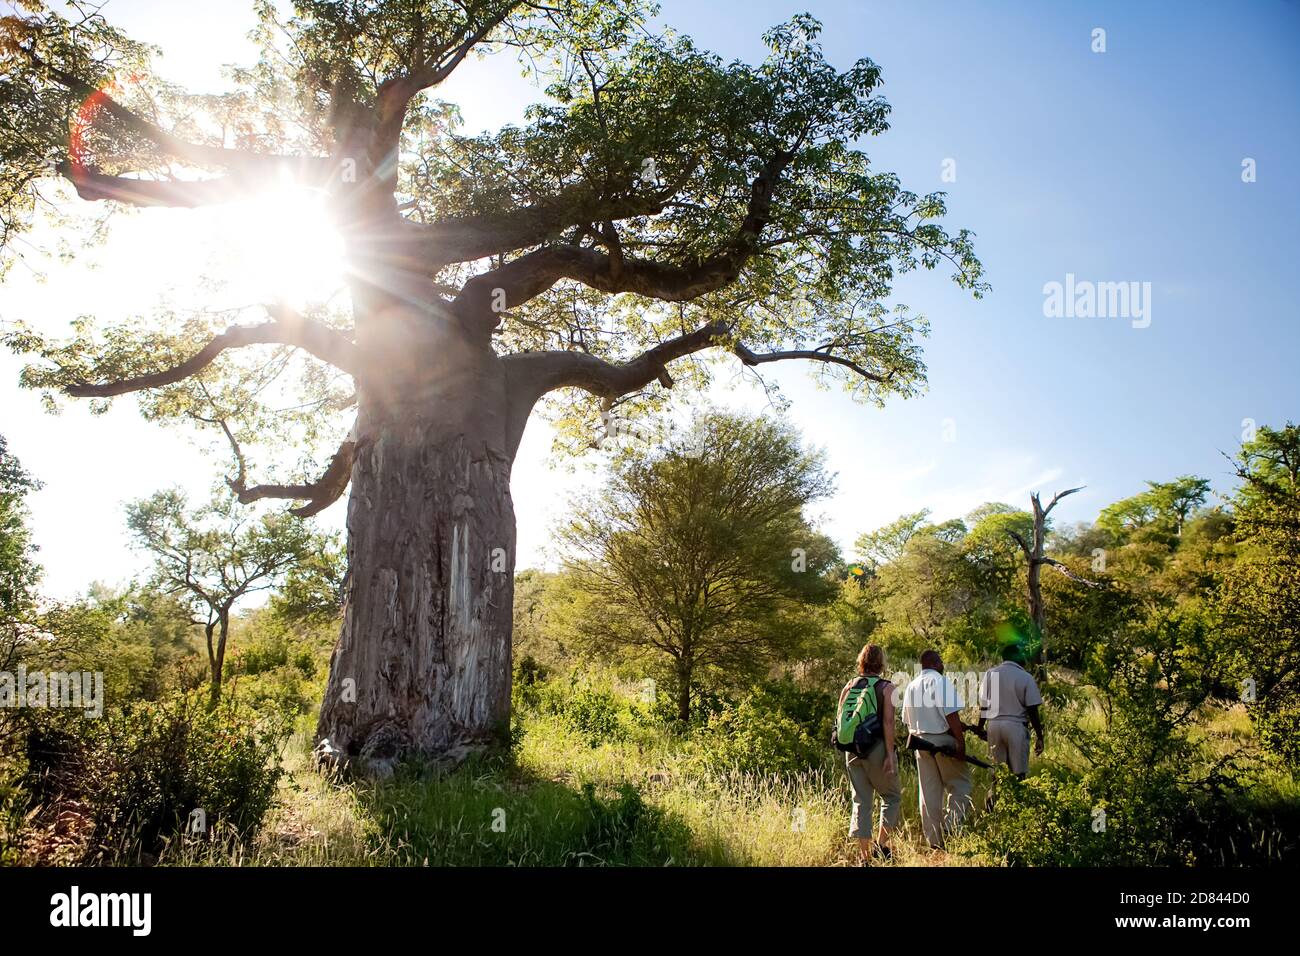 Three people on a walking trail in the Pafuri Region, Kruger National Park Stock Photo